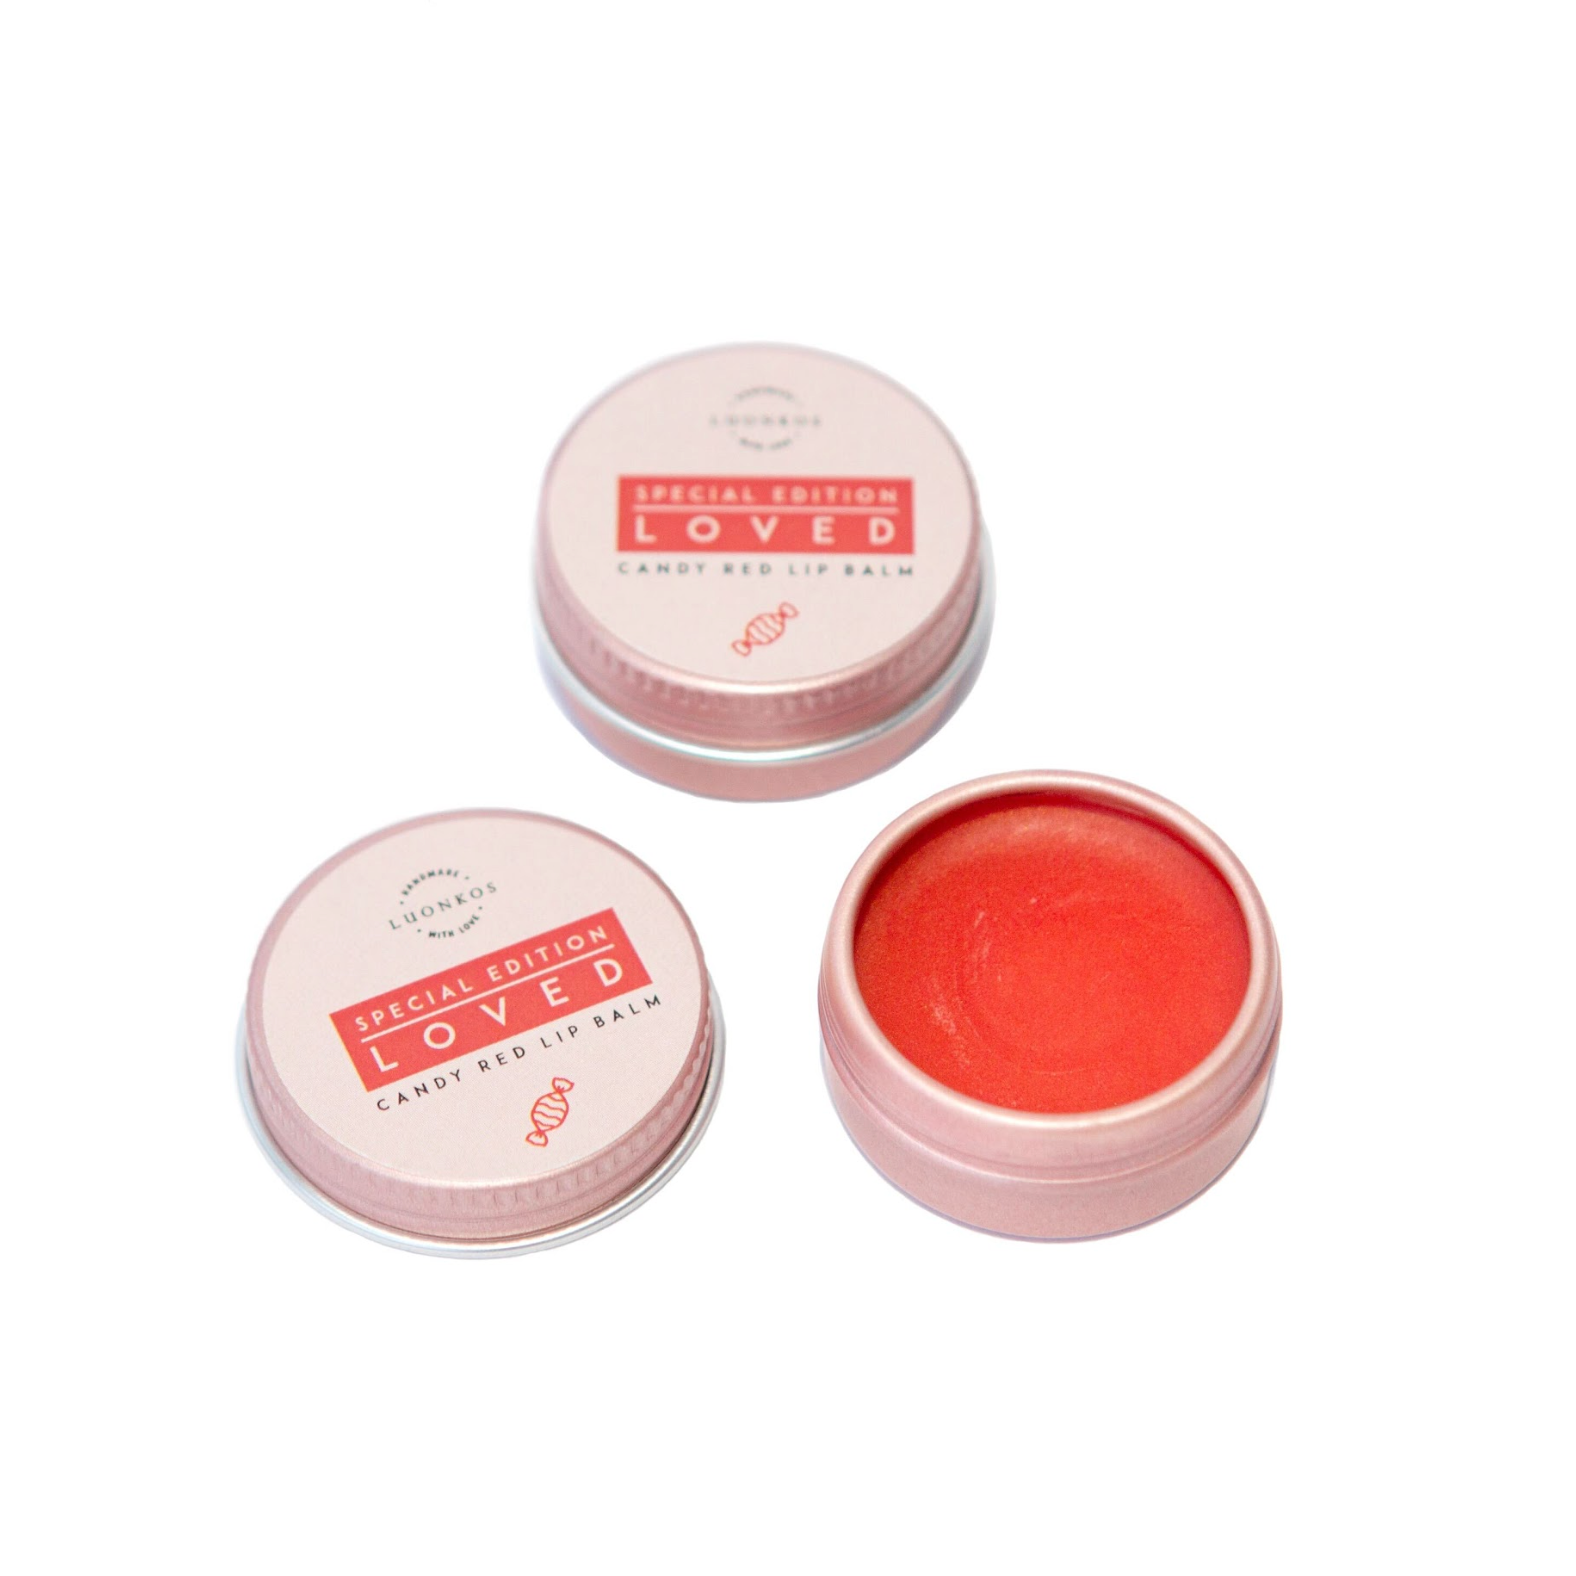 Loved Special Edition Candy Red Lip Balm - 10ml